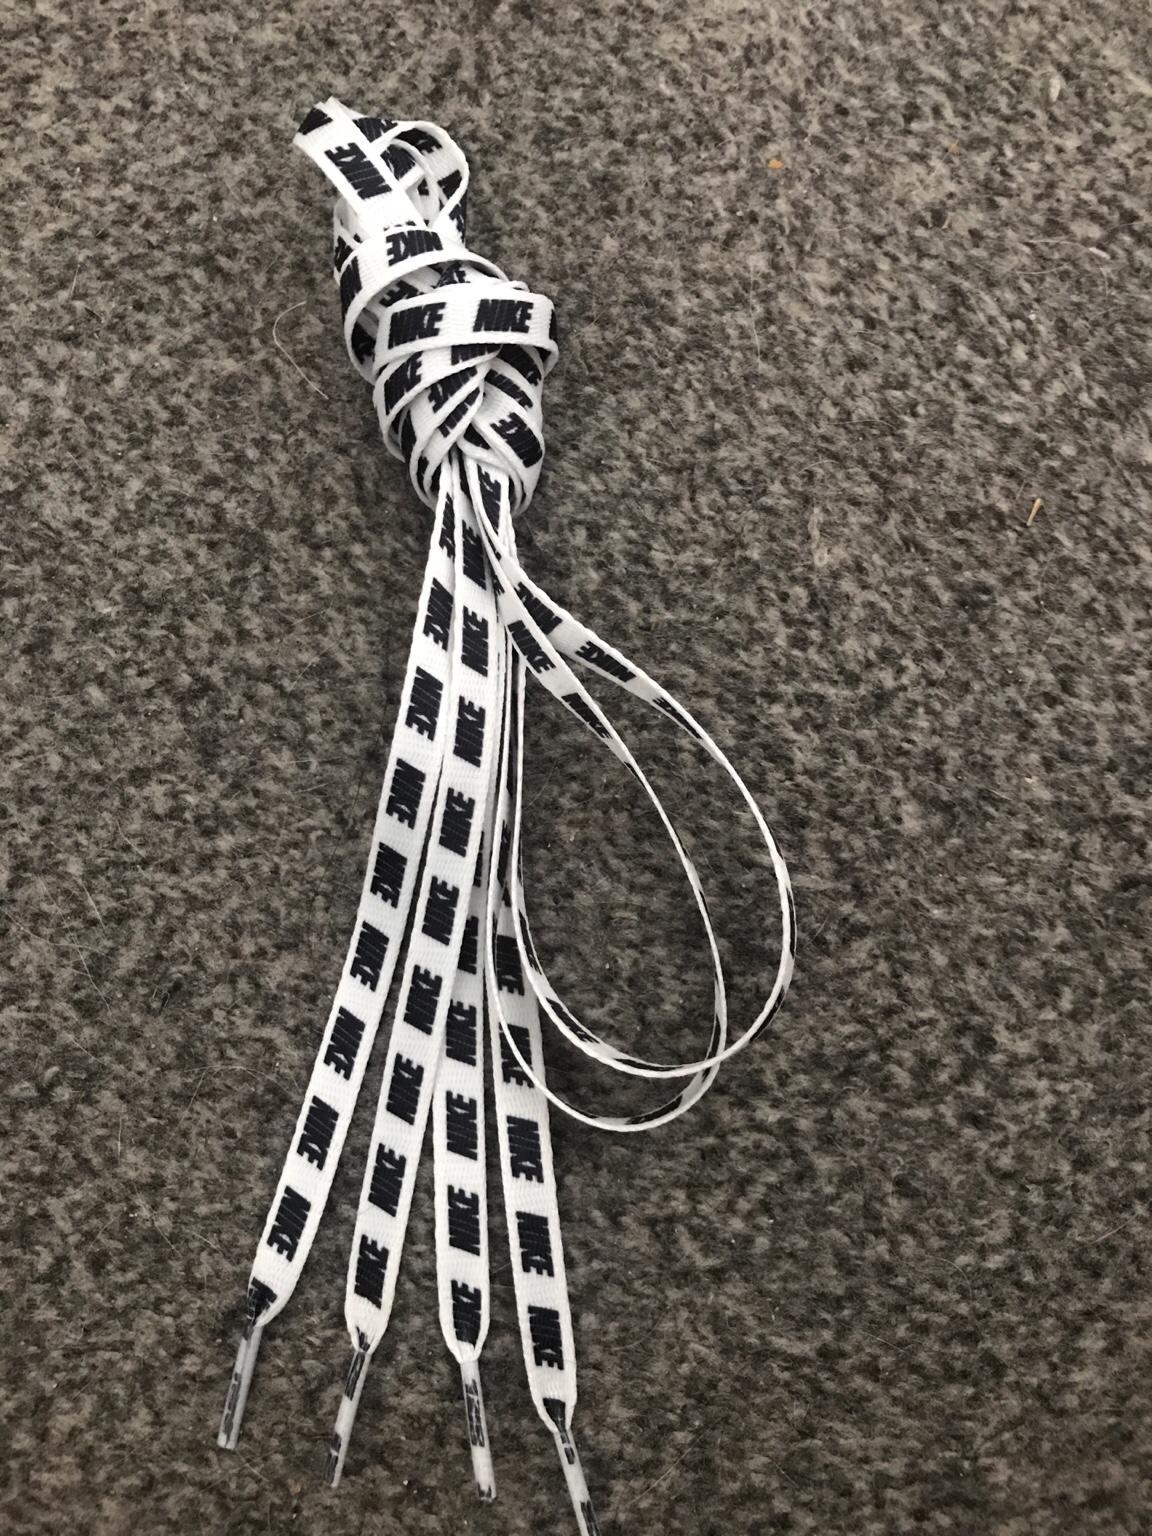 black and white nike laces